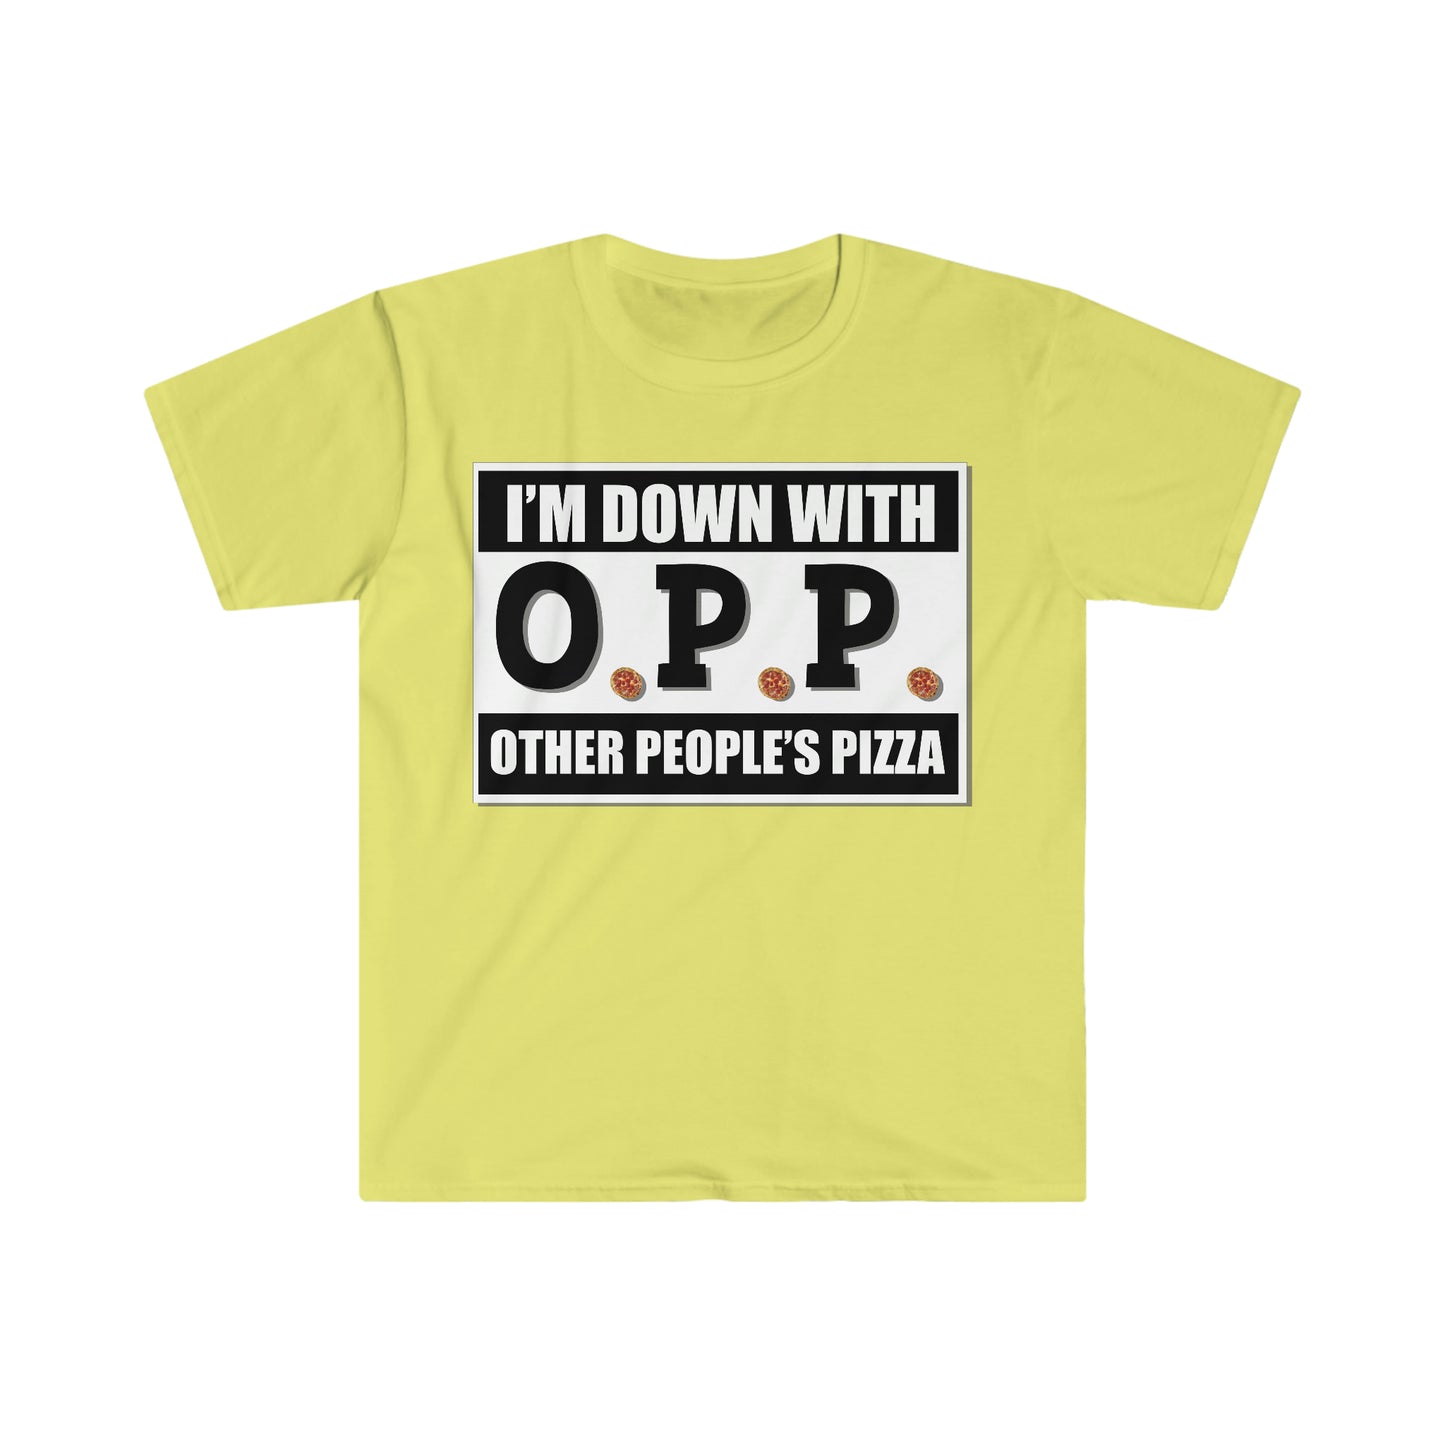 OTHER PEOPLE'S PIZZA